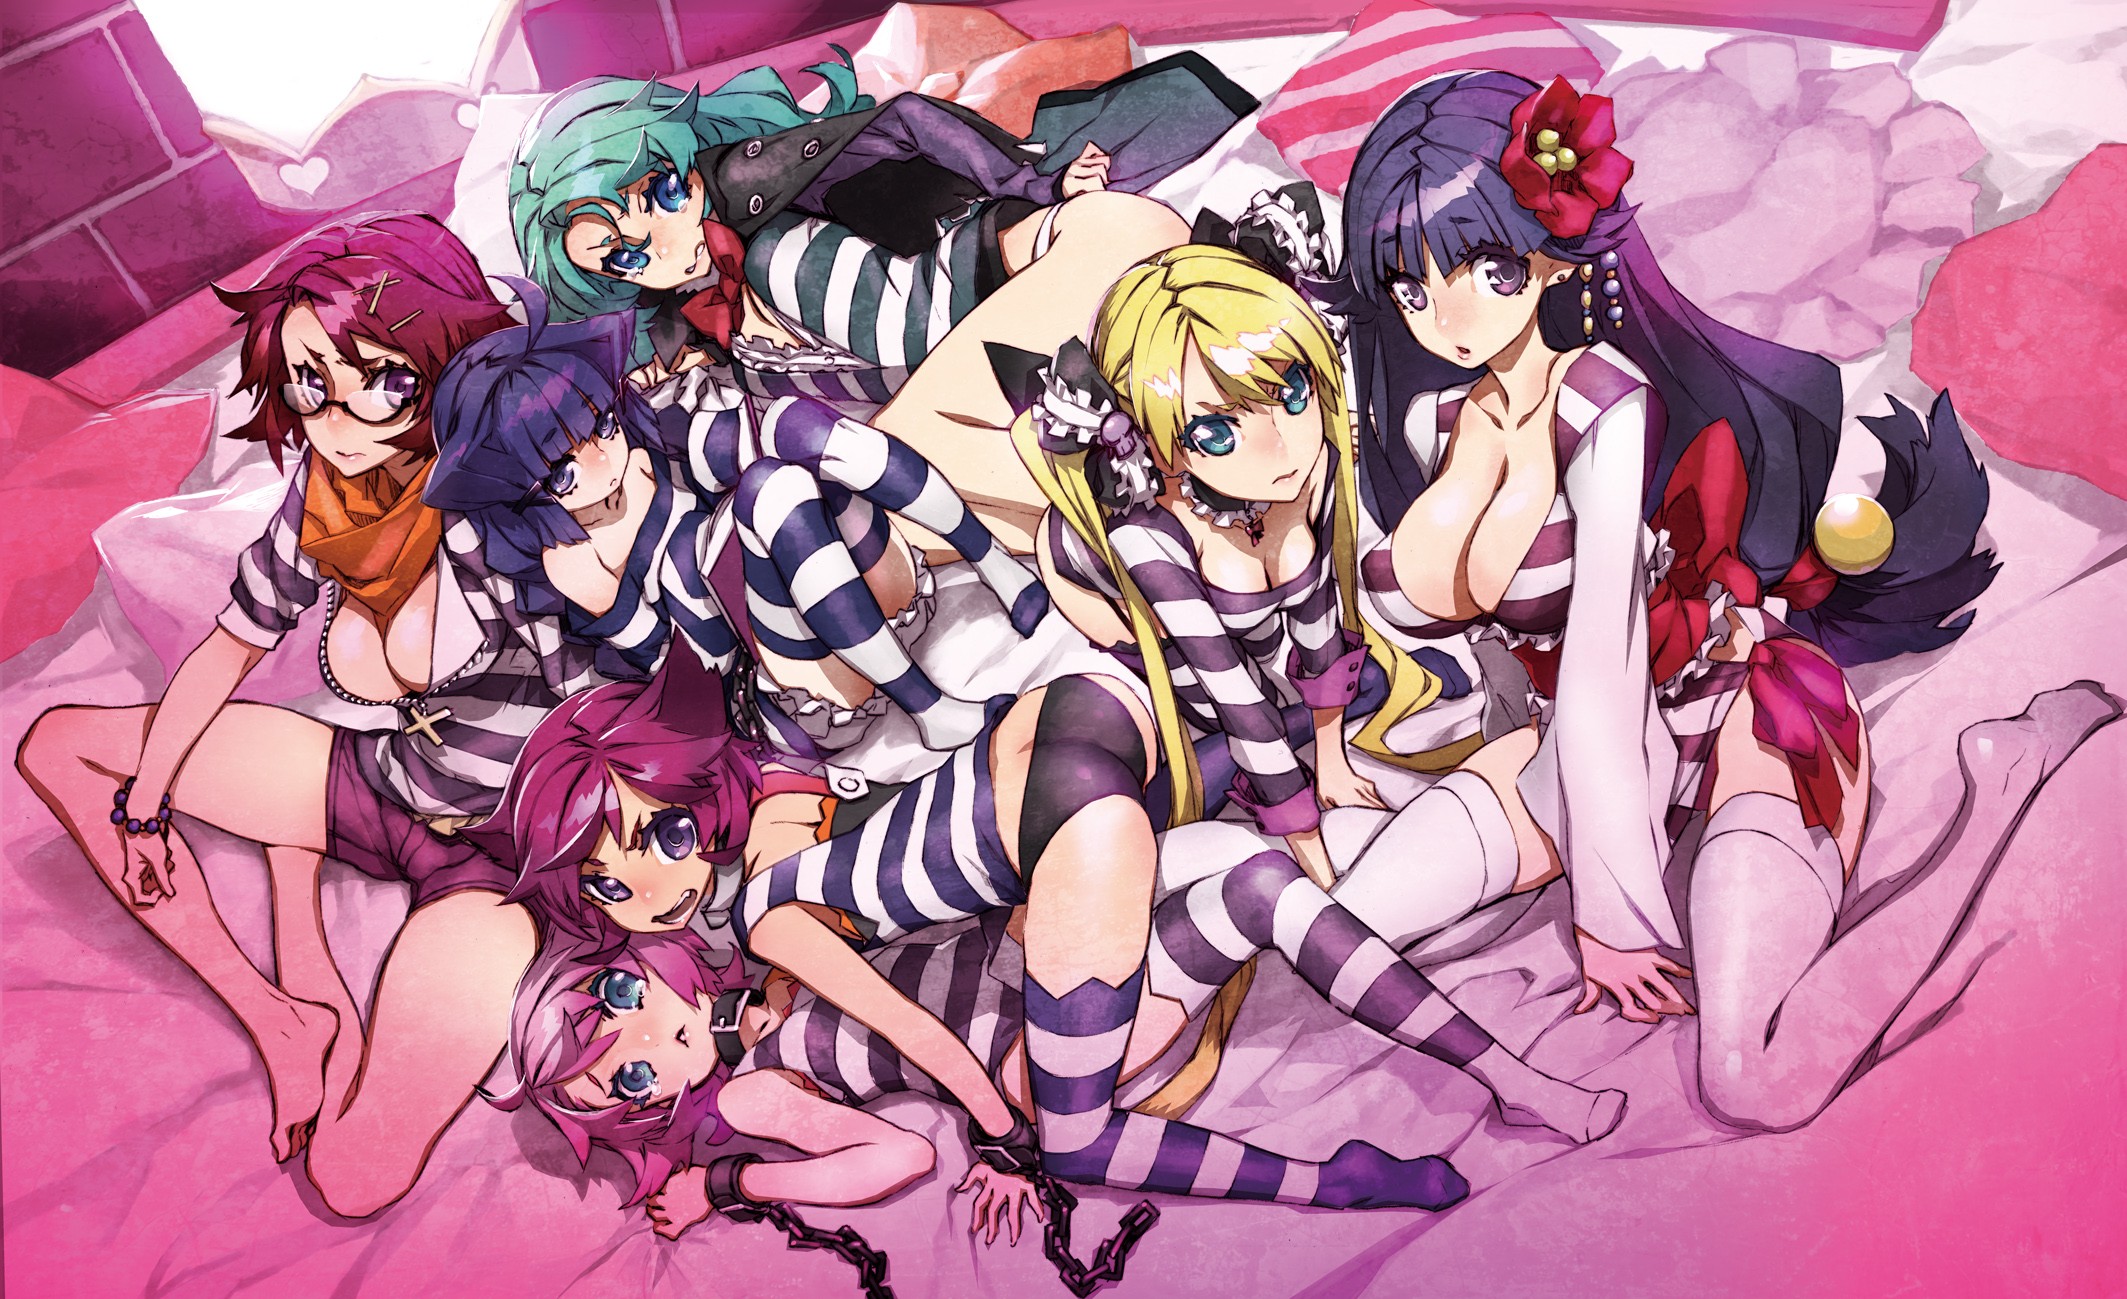 Anime 2127x1299 striped clothing anime girls ass panties kneeling big boobs flower in hair purple hair barefoot chains long hair blue eyes group of women stockings boobs knees together anime women women with glasses curvy underwear lingerie